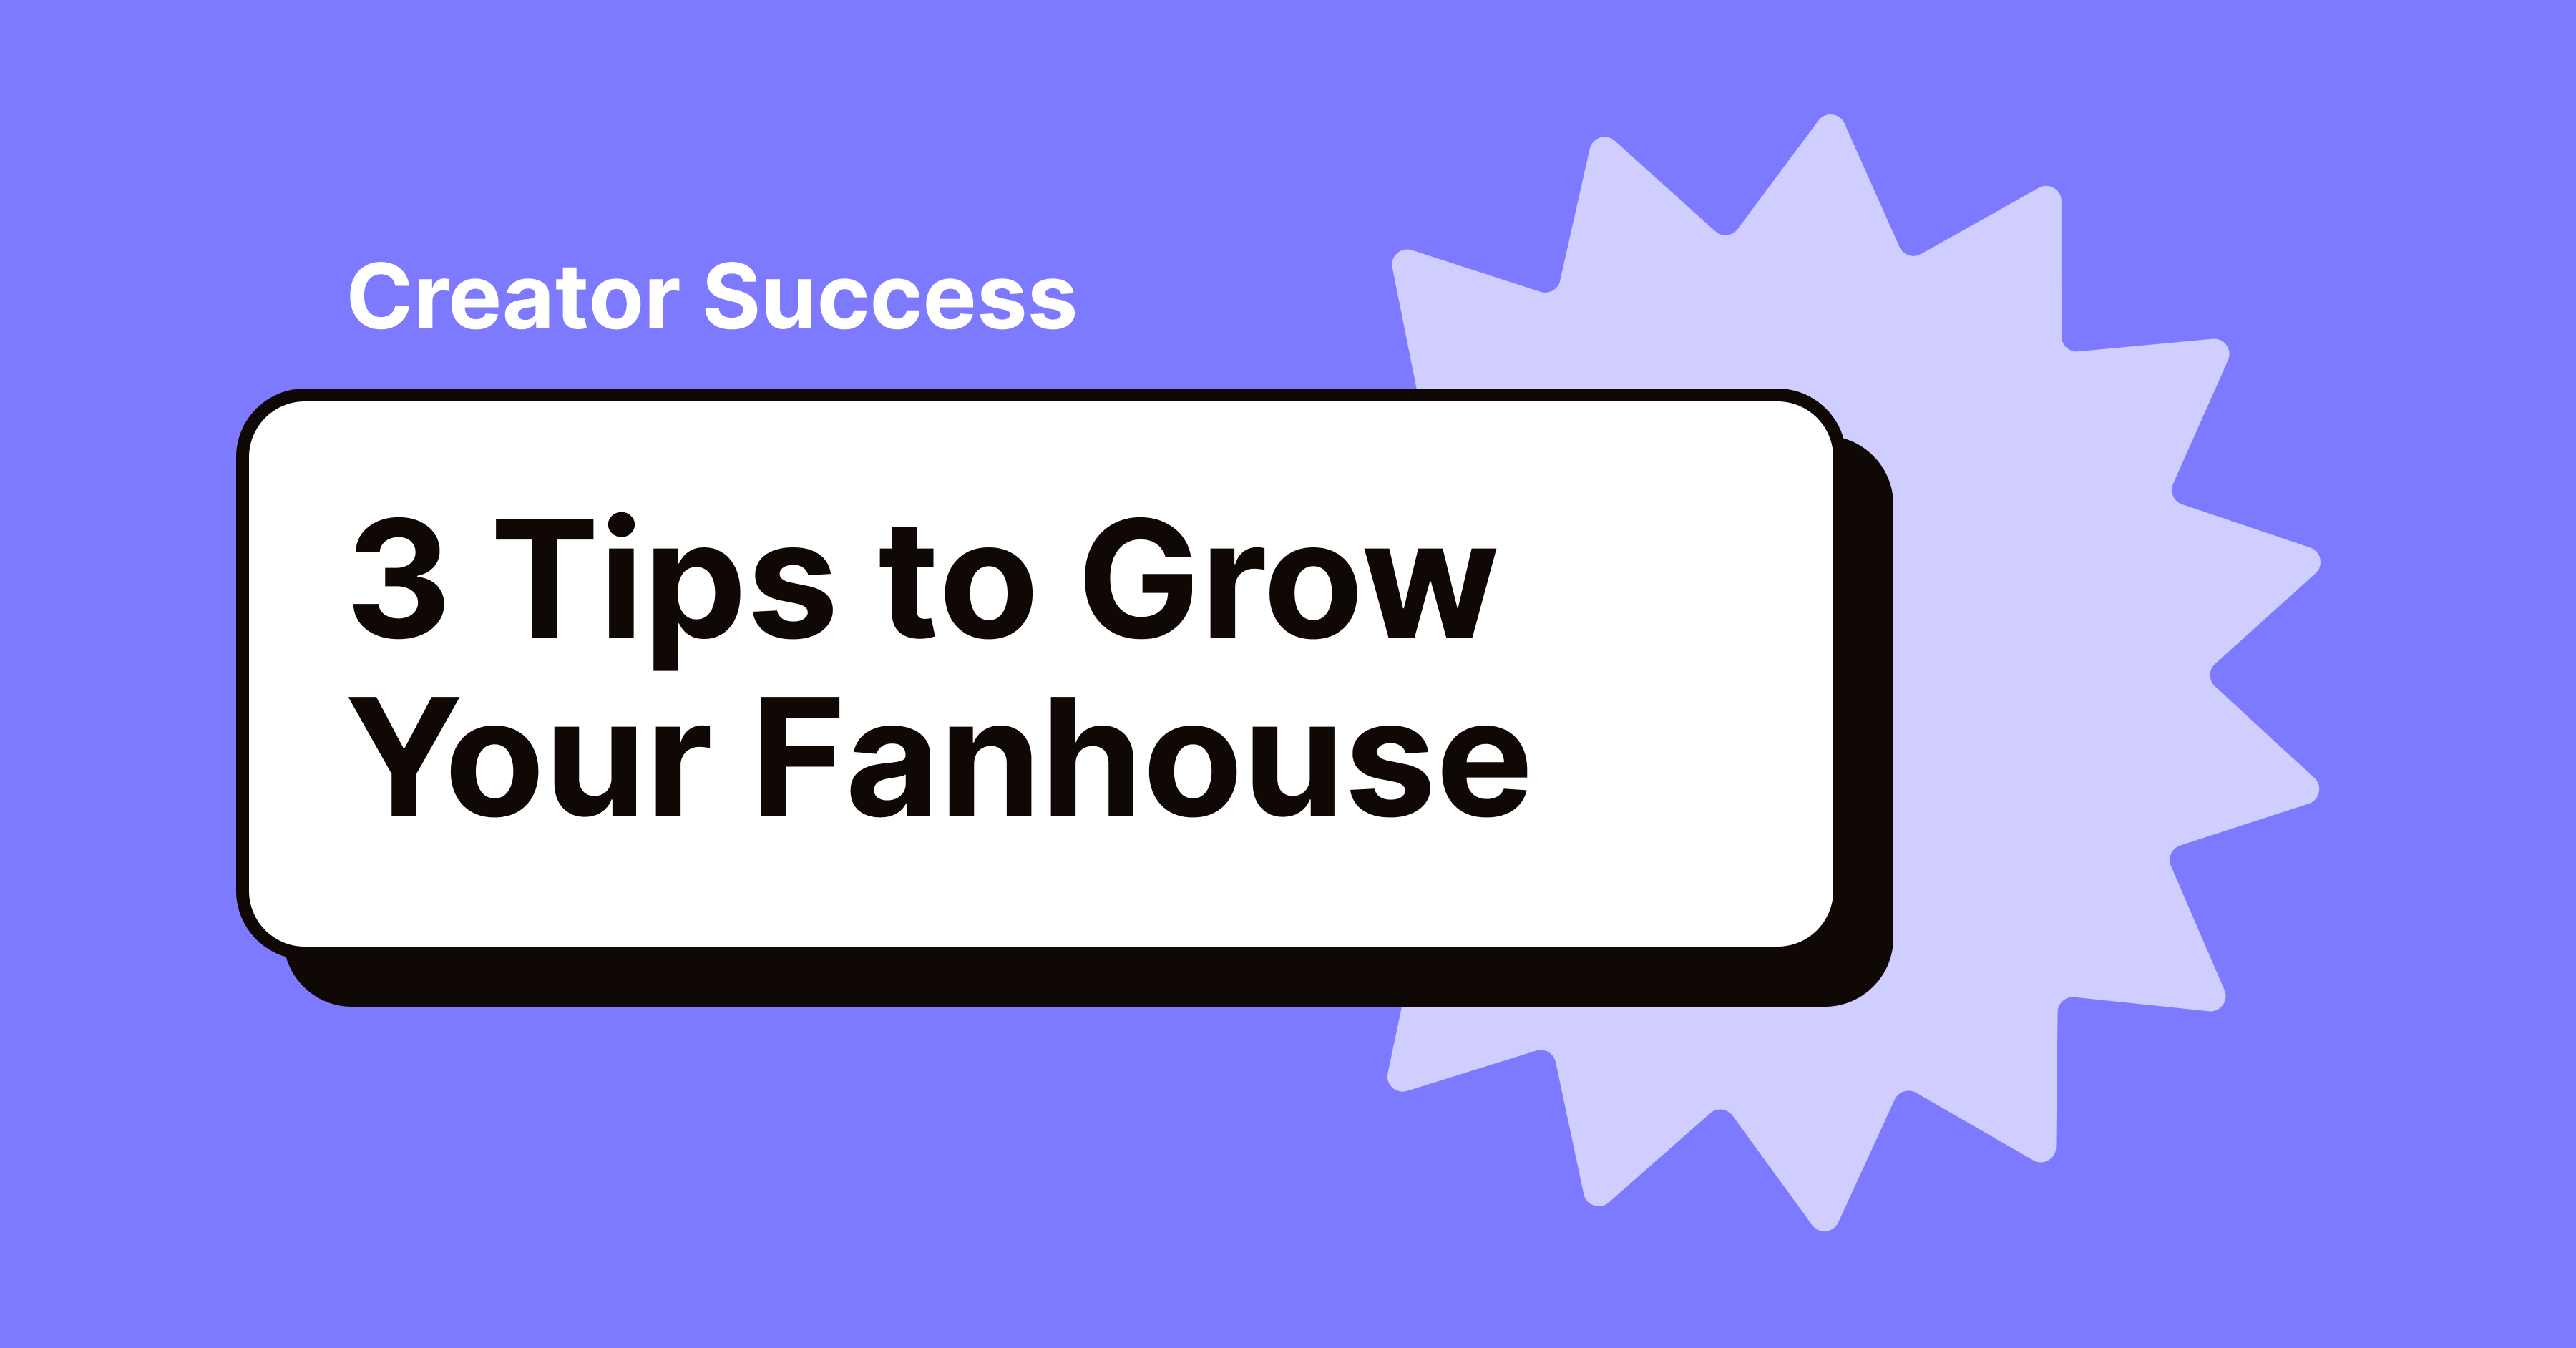 3 Tips to Grow Your Fanhouse